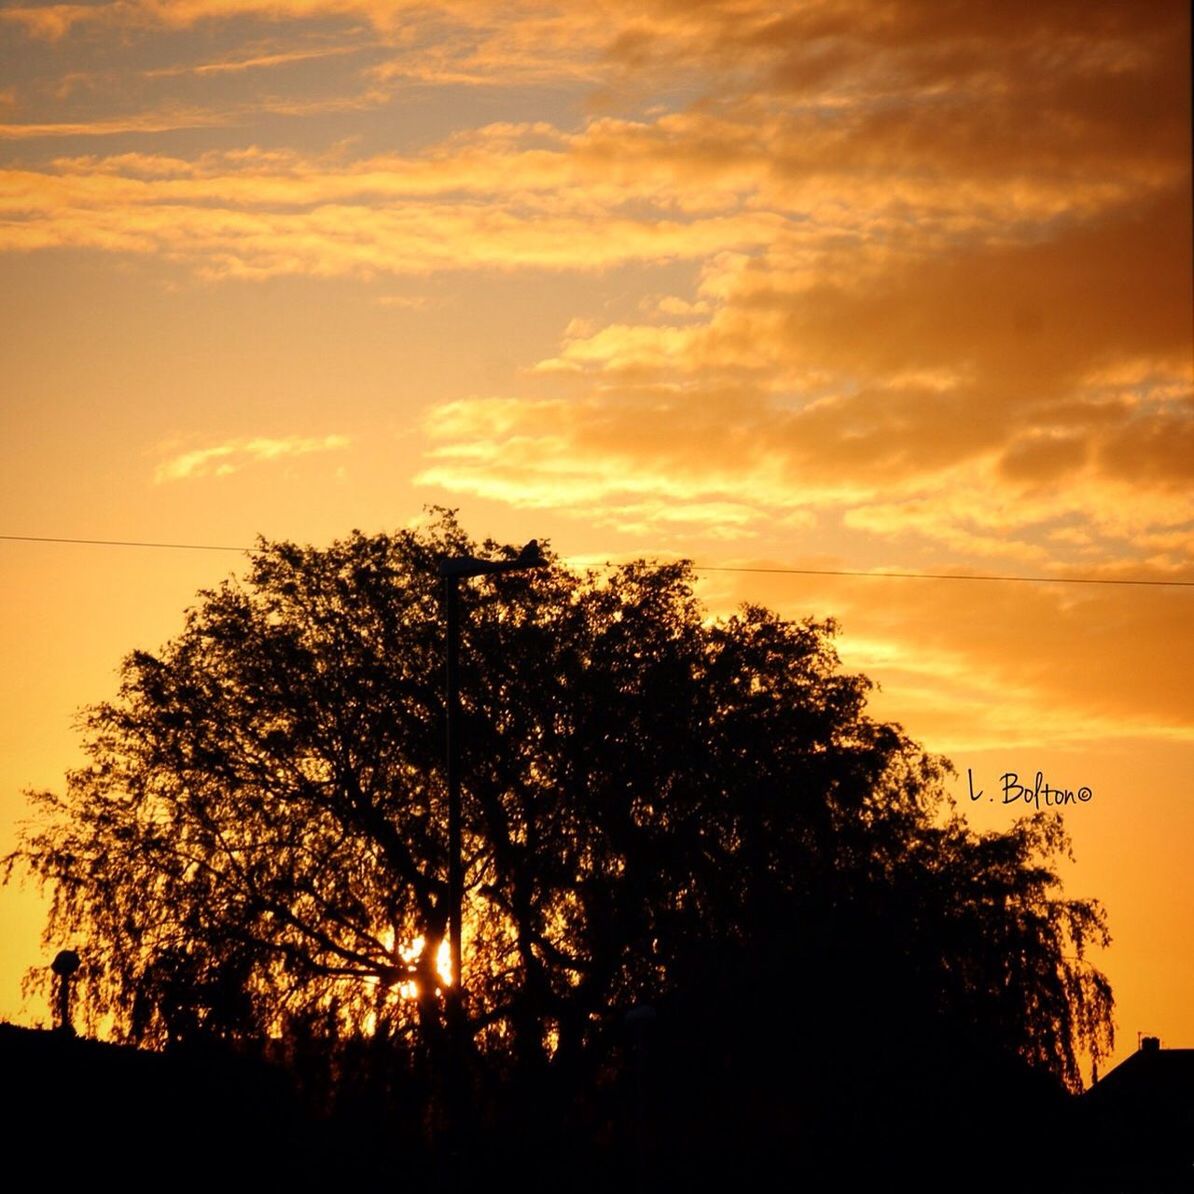 sunset, tree, nature, orange color, silhouette, sky, growth, beauty in nature, no people, outdoors, cloud - sky, scenics